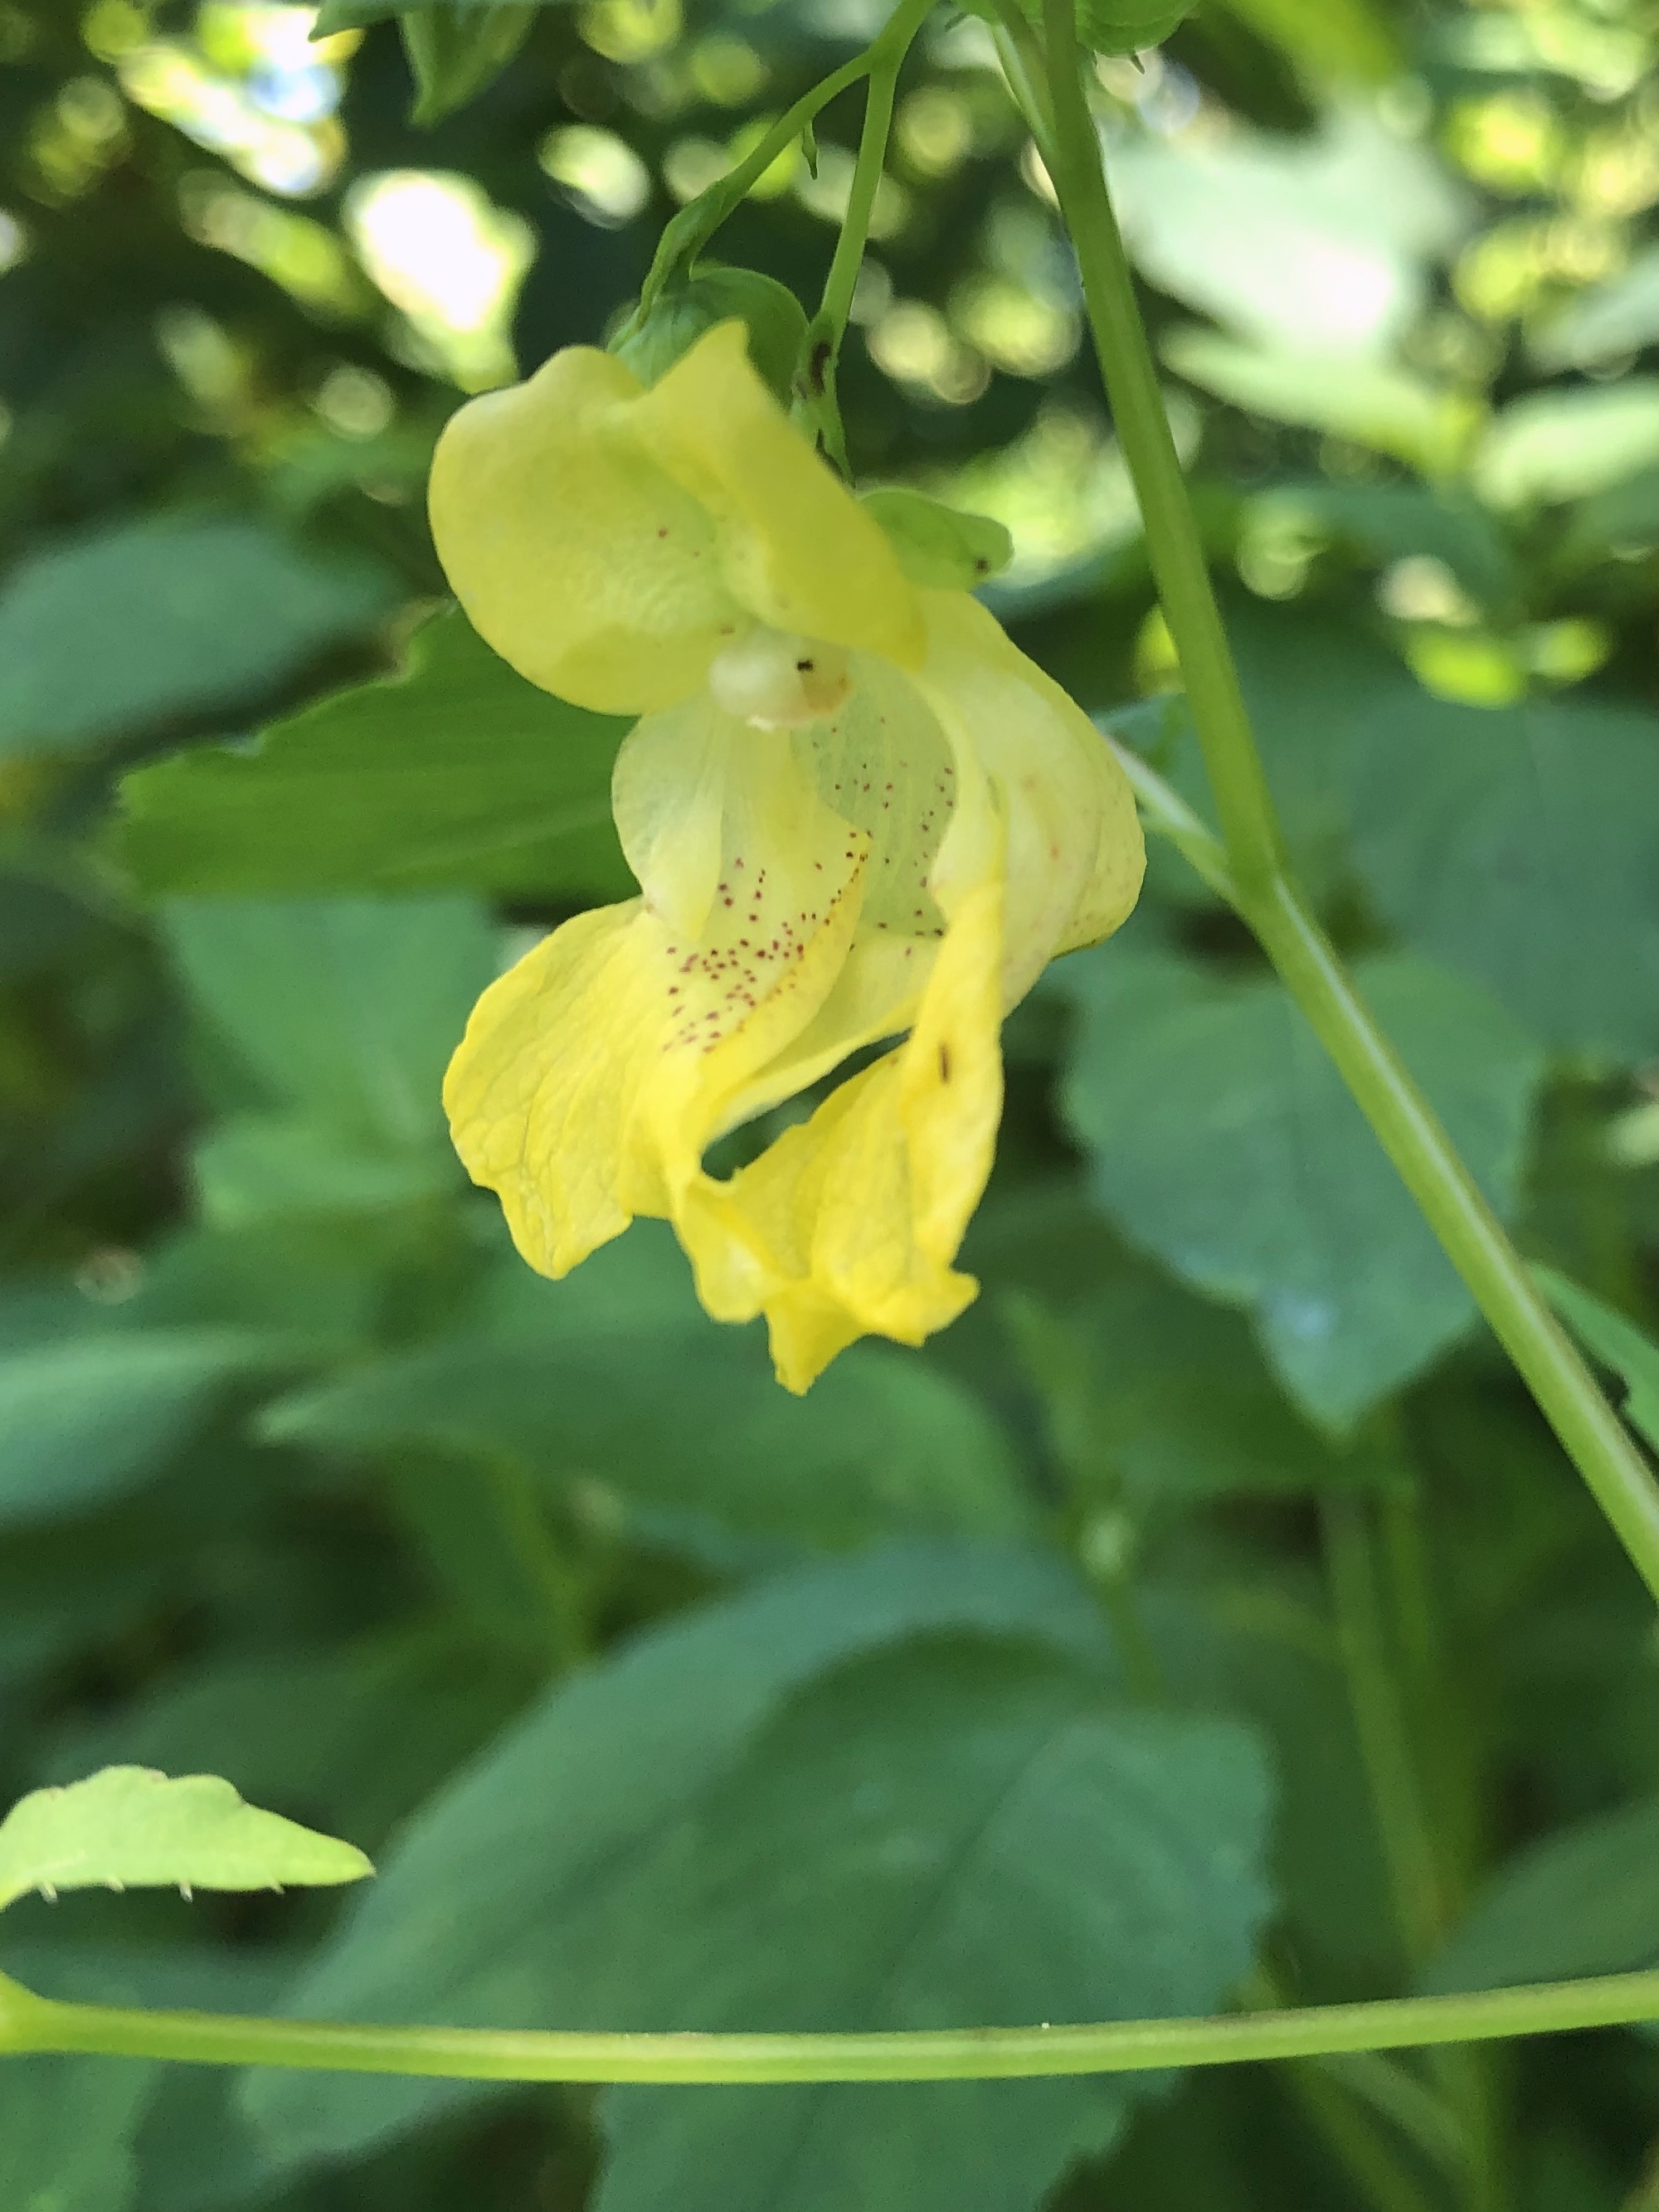 Yellow Jewelweed by Marston Springs on August 11, 2020.